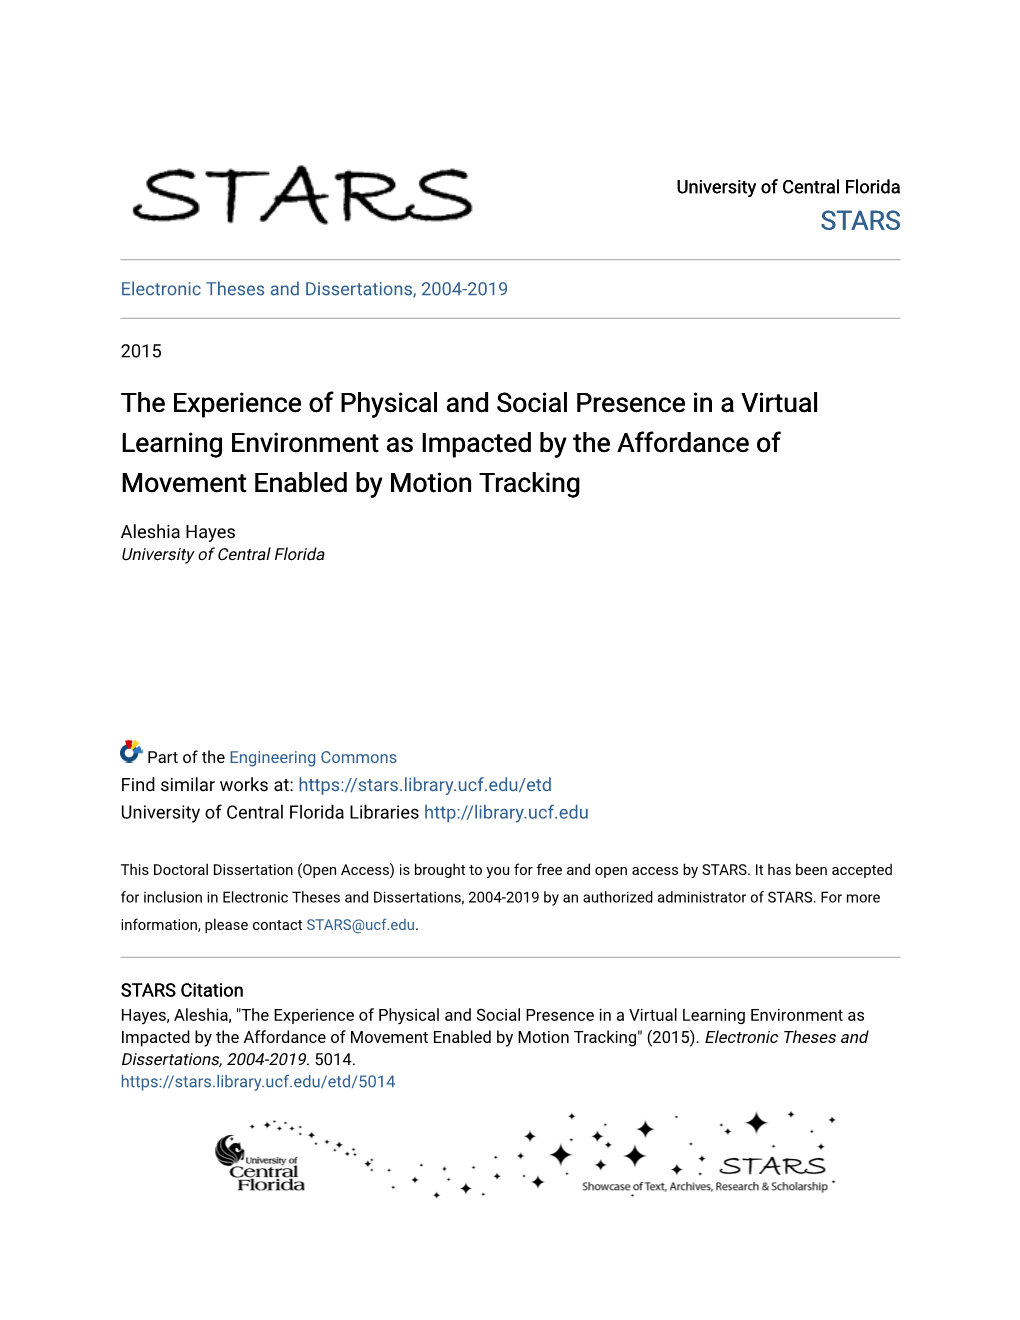 The Experience of Physical and Social Presence in a Virtual Learning Environment As Impacted by the Affordance of Movement Enabled by Motion Tracking